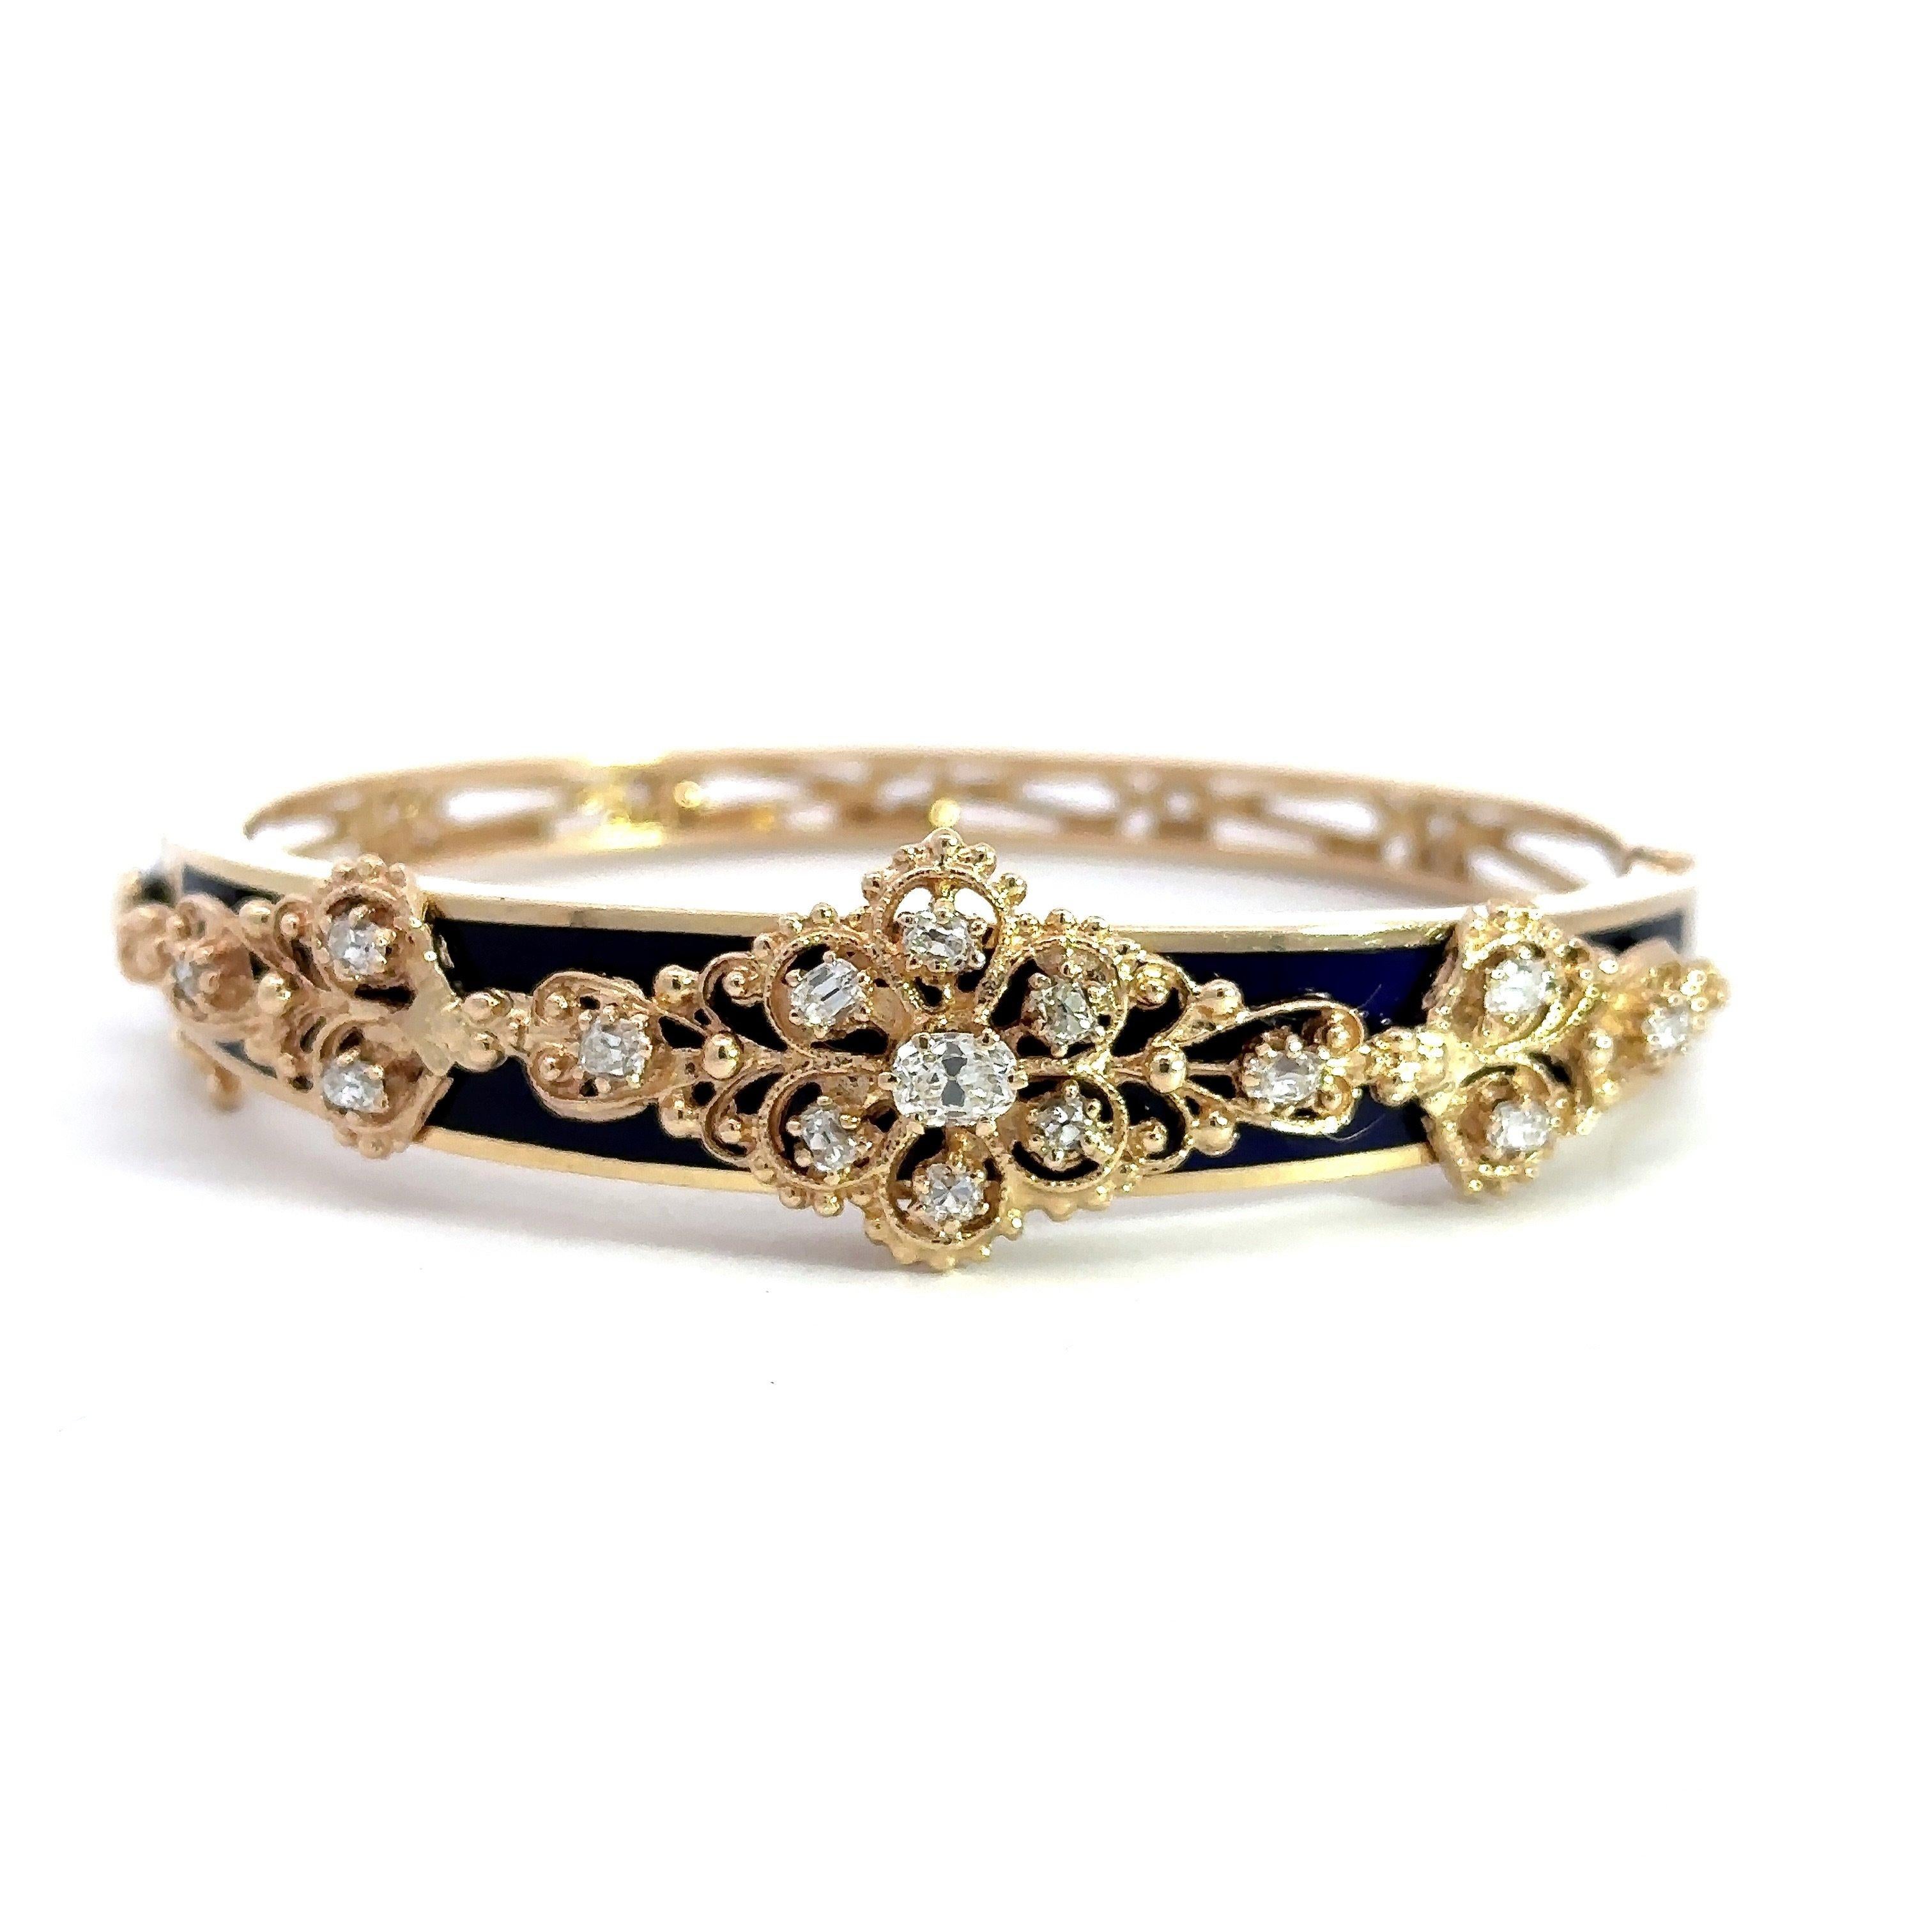 This Jack Gutschneider (stamped JG JLRY) bangle dates from the 1950's and is crafted in 14KT yellow gold with black enamel and approximately 1CT old mine cut diamonds, F Color, VS-SI Clarity. The bracelet measures 16.3mm at the widest point and